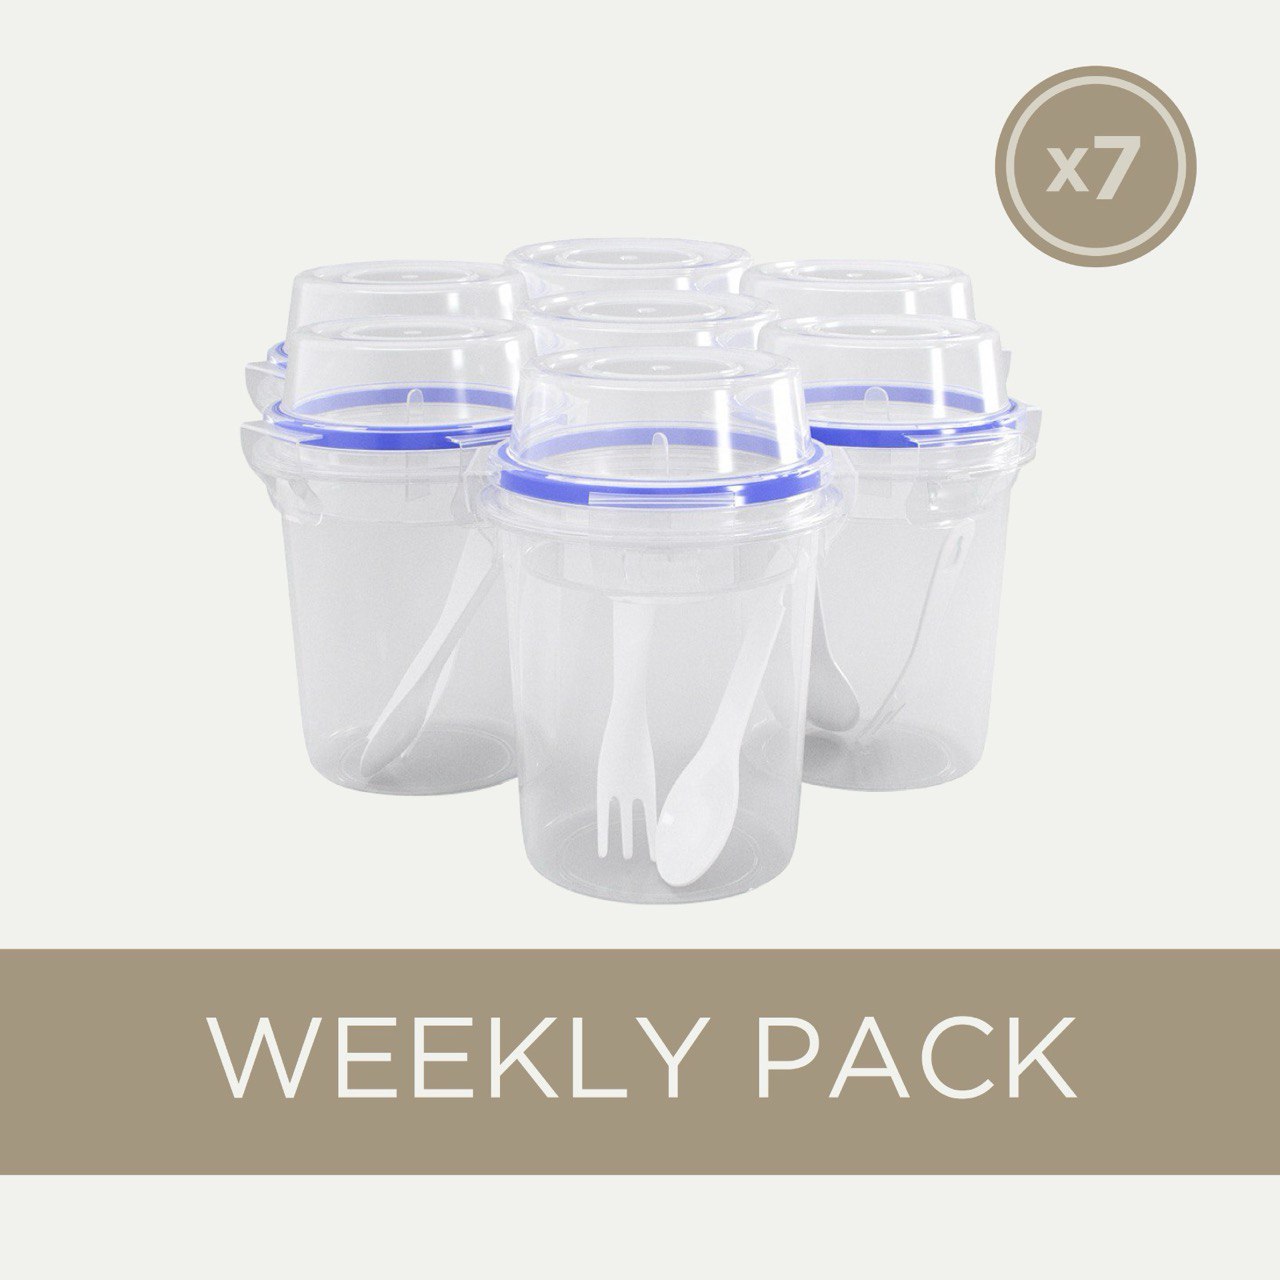 WEEKLY PACK - Set 7 Meal prep containers